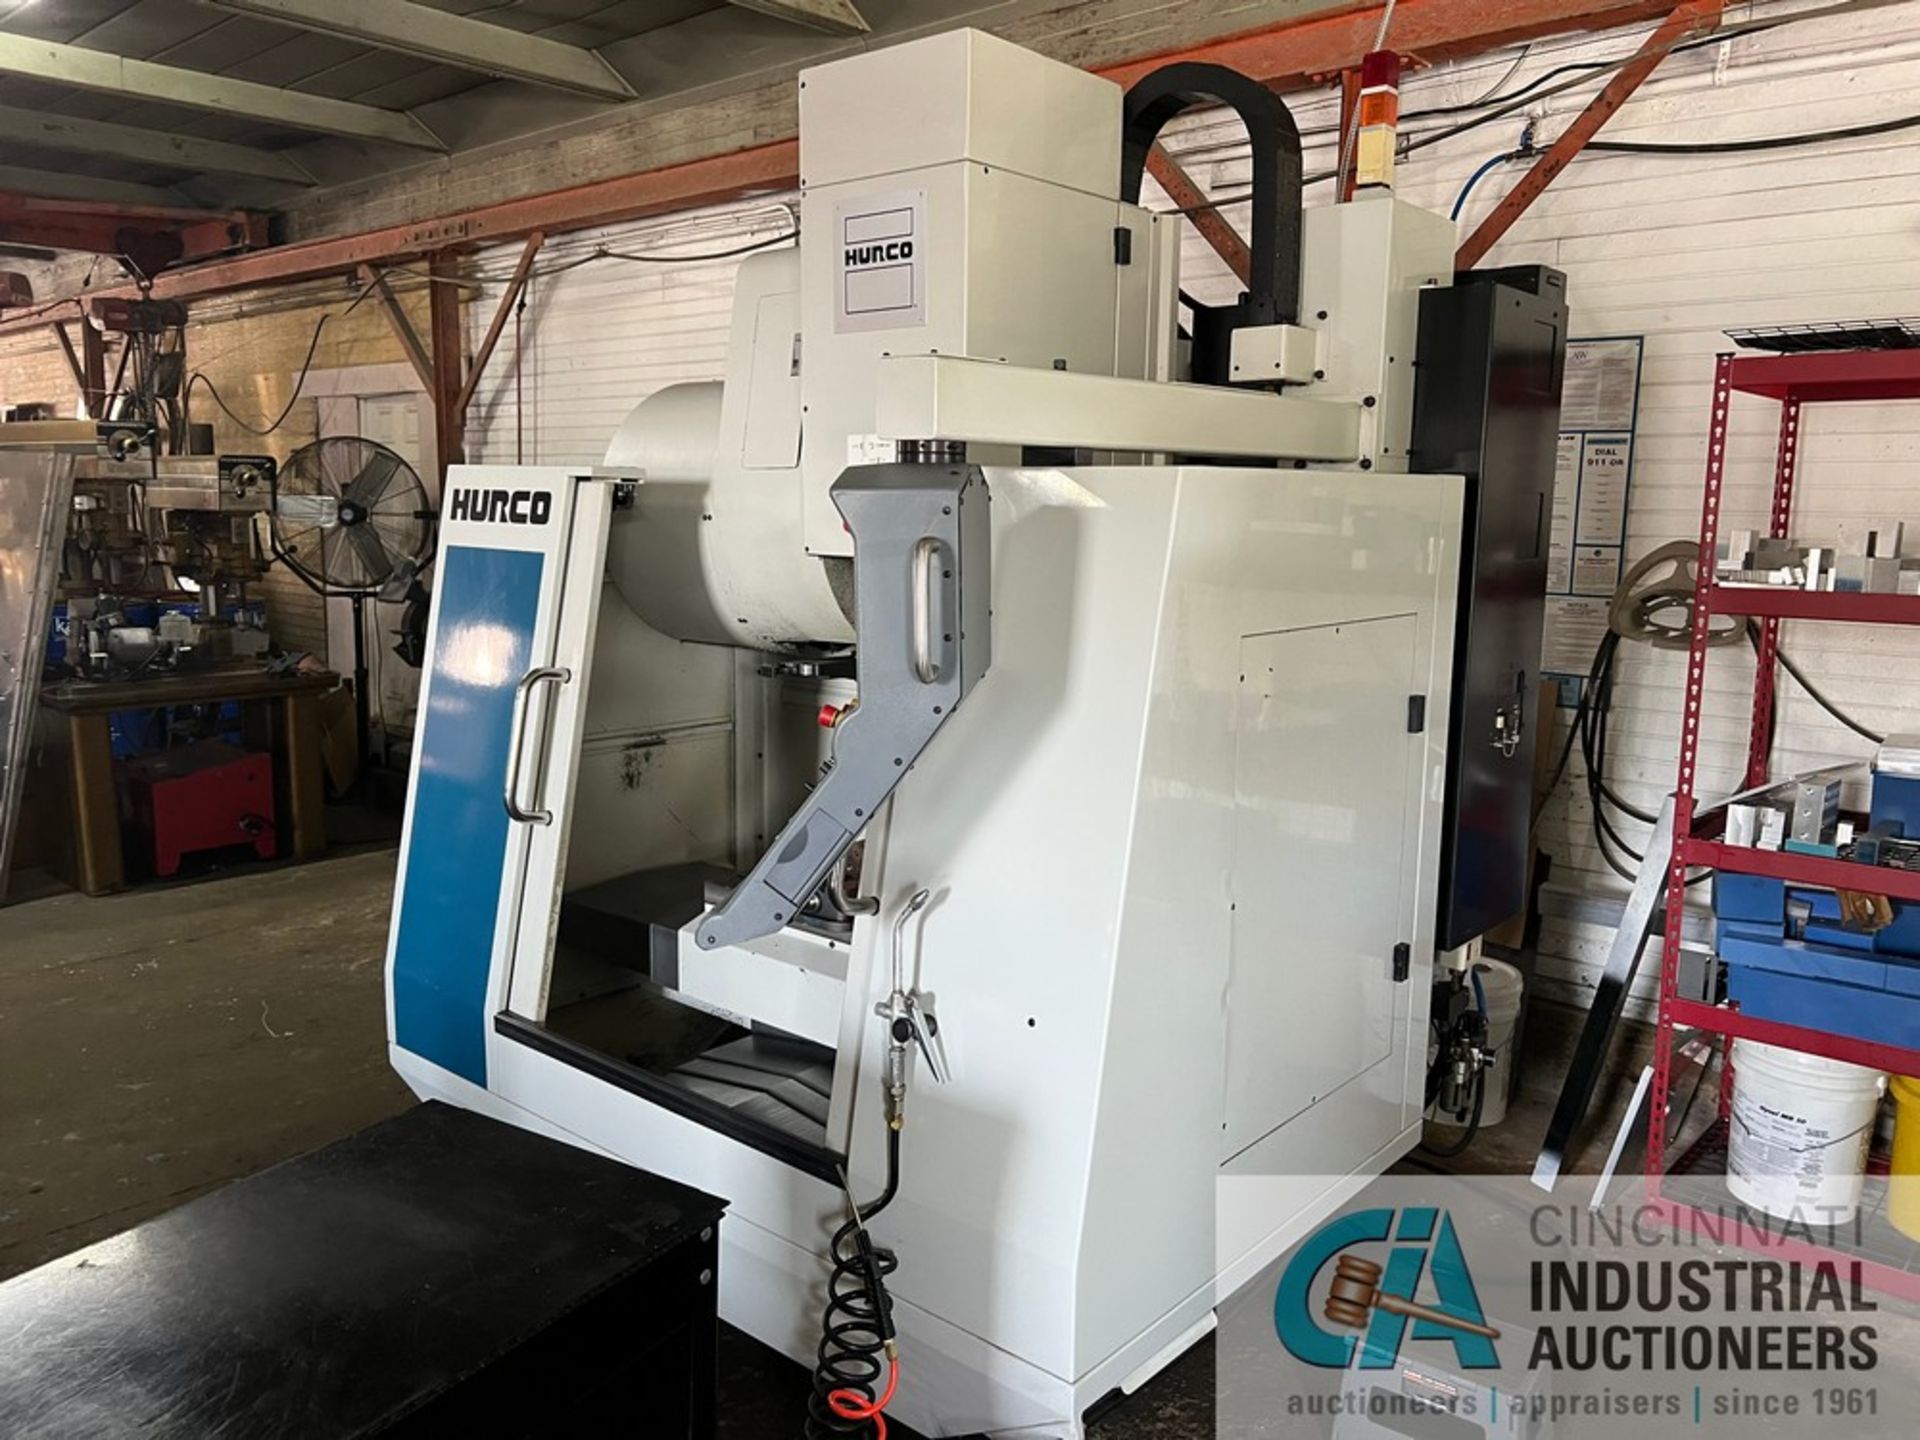 HURCO MODEL VM1 CNC VERTICAL MACHINING CENTER; S/N 06013124BEA, 8,000 RPM SPINDLE, 40 TAPER (2004) - Image 7 of 17